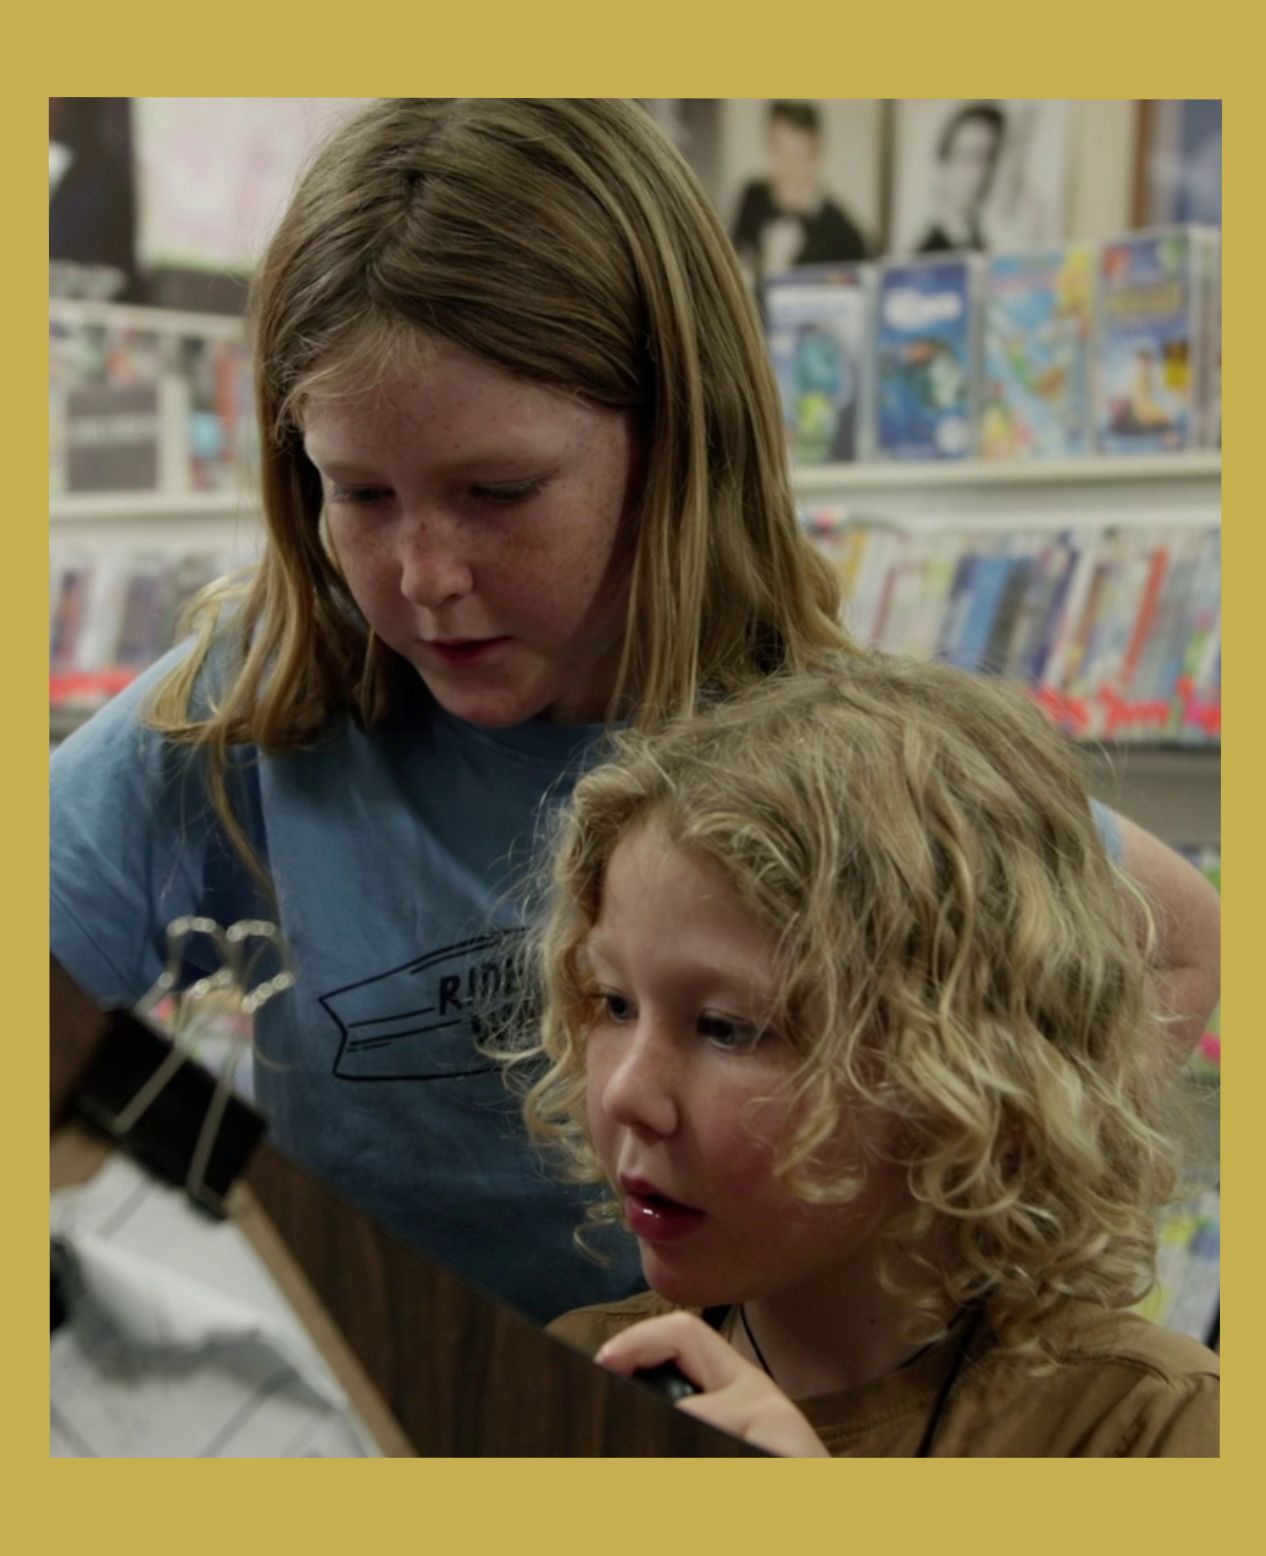 Image has a gold border and is of two young brothers playing a 1980s arcade machine at Bellingen Video Connection from the documentary Return Chute: The survival of a small town video store